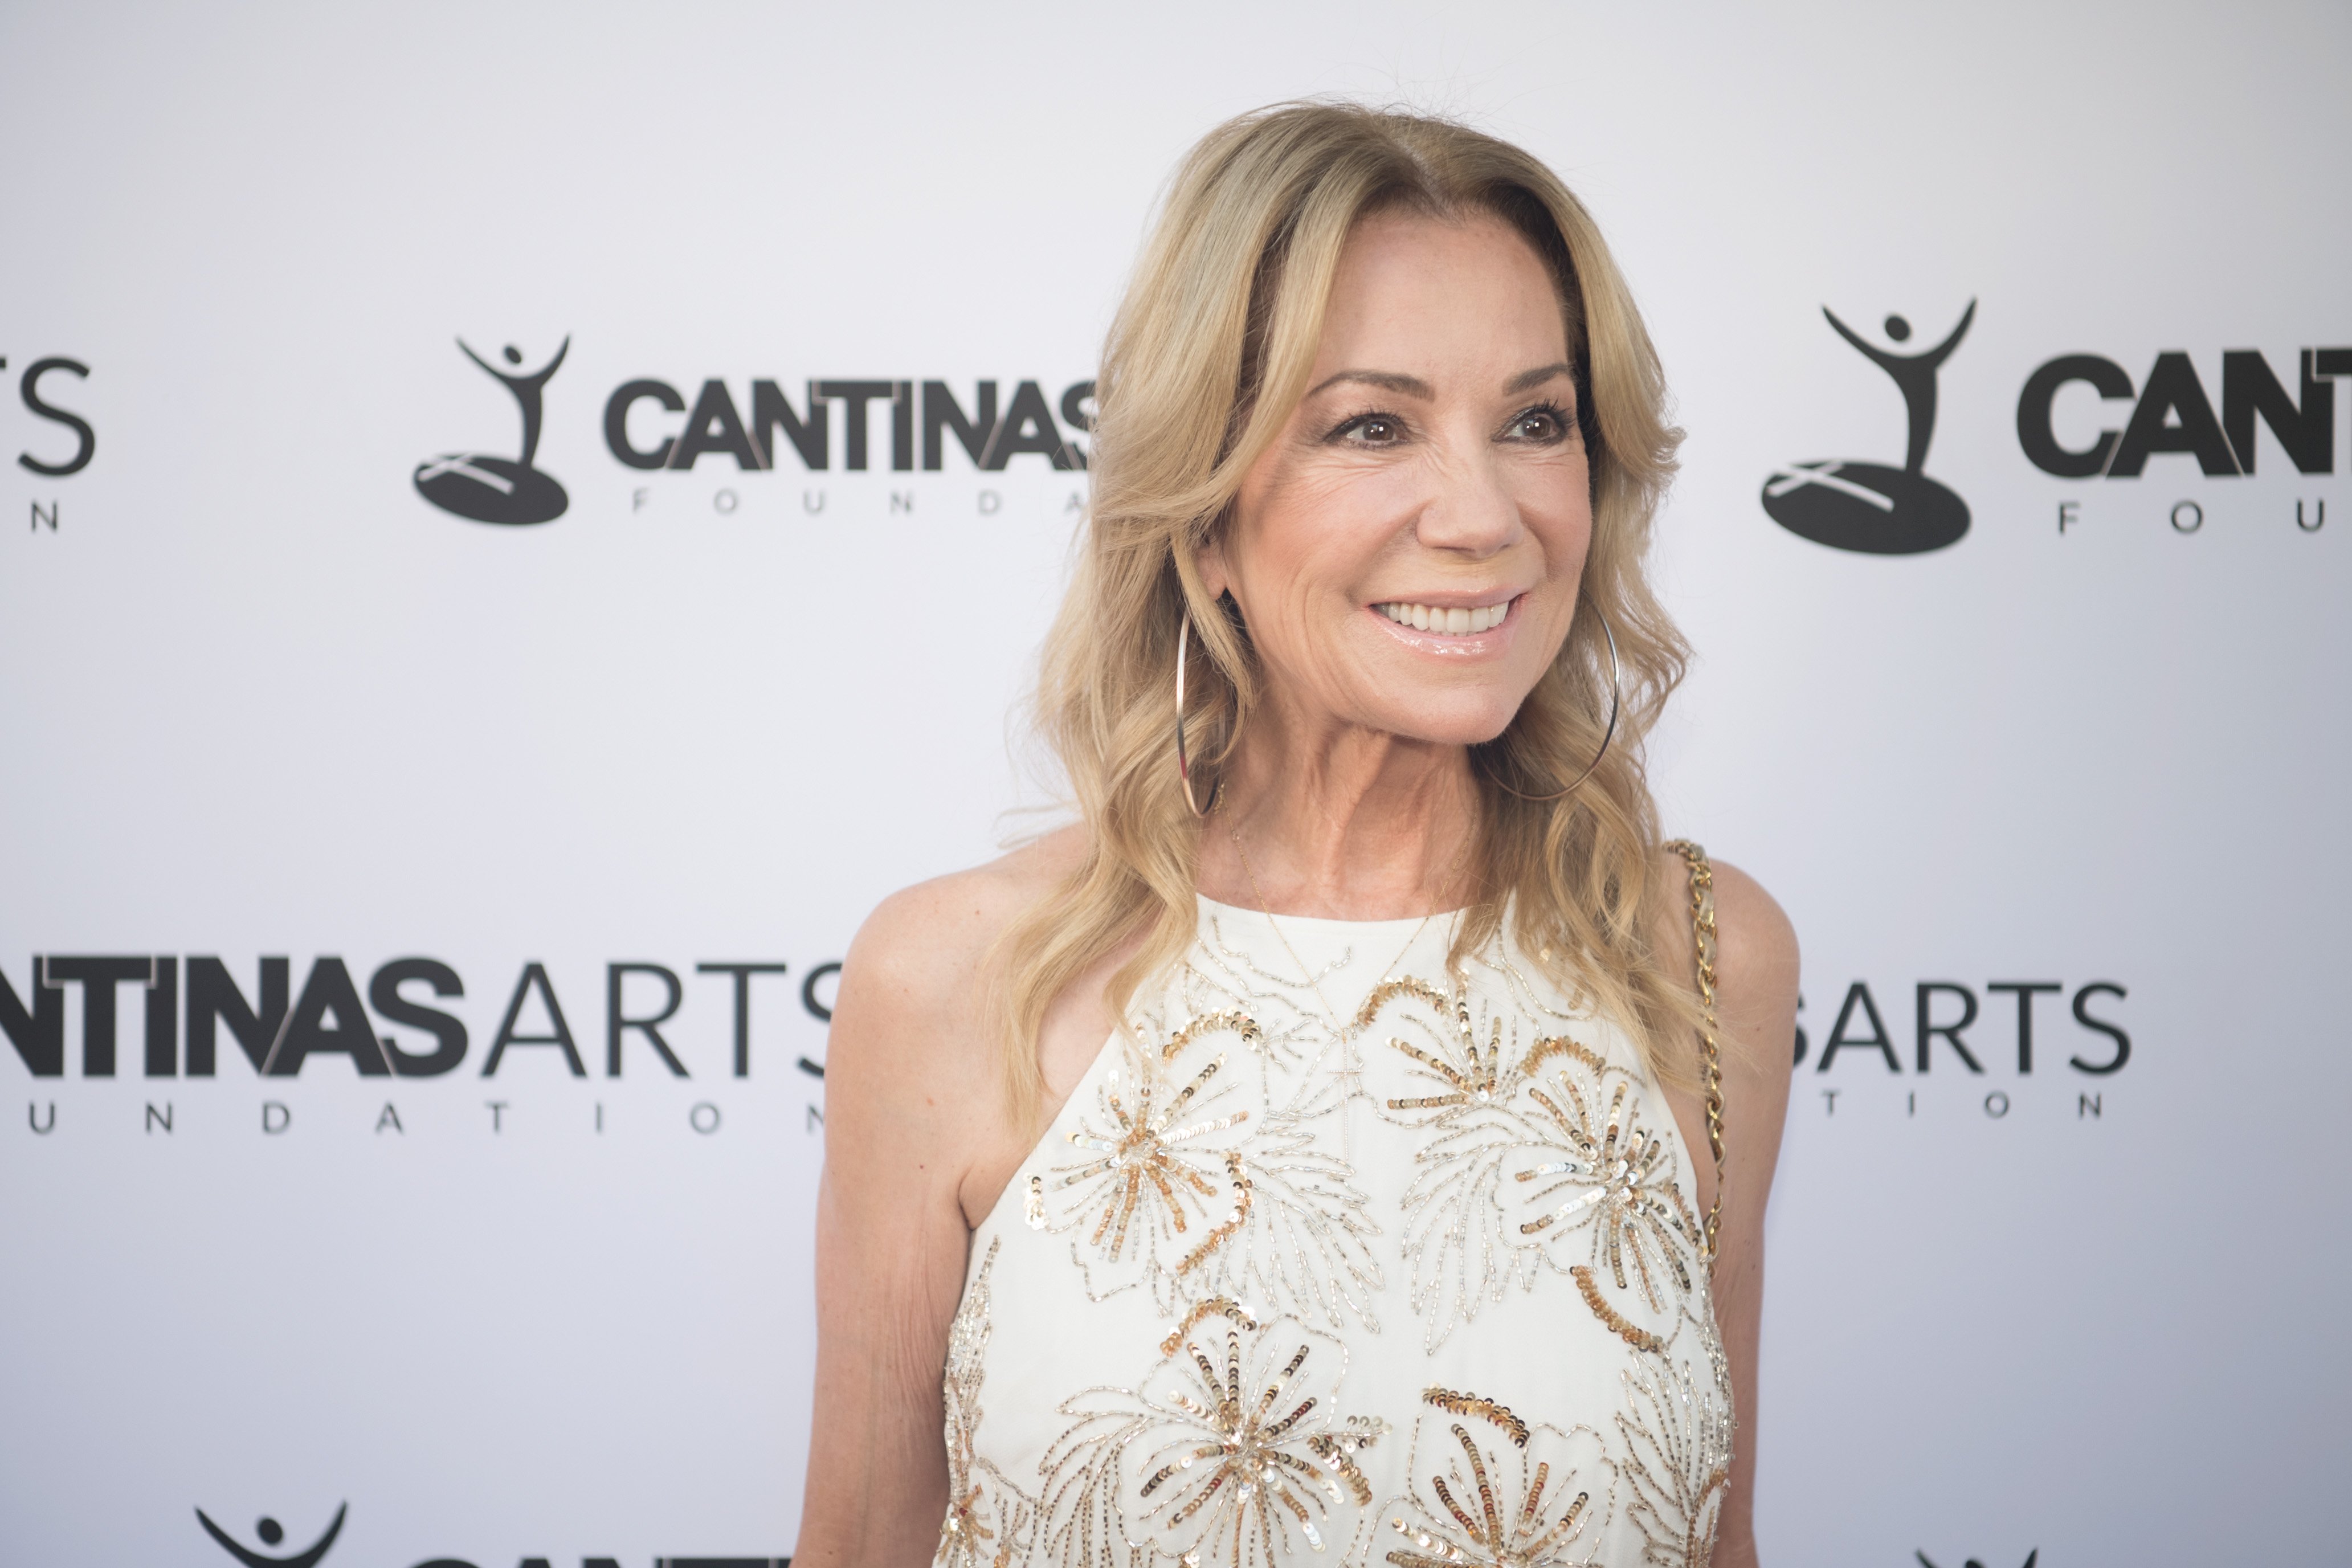 Kathie Lee Gifford arrives at The Cantinas Arts Foundation COTA Celebration of the Arts on September 15, 2018, in Malibu, California. | Source: Getty Images.